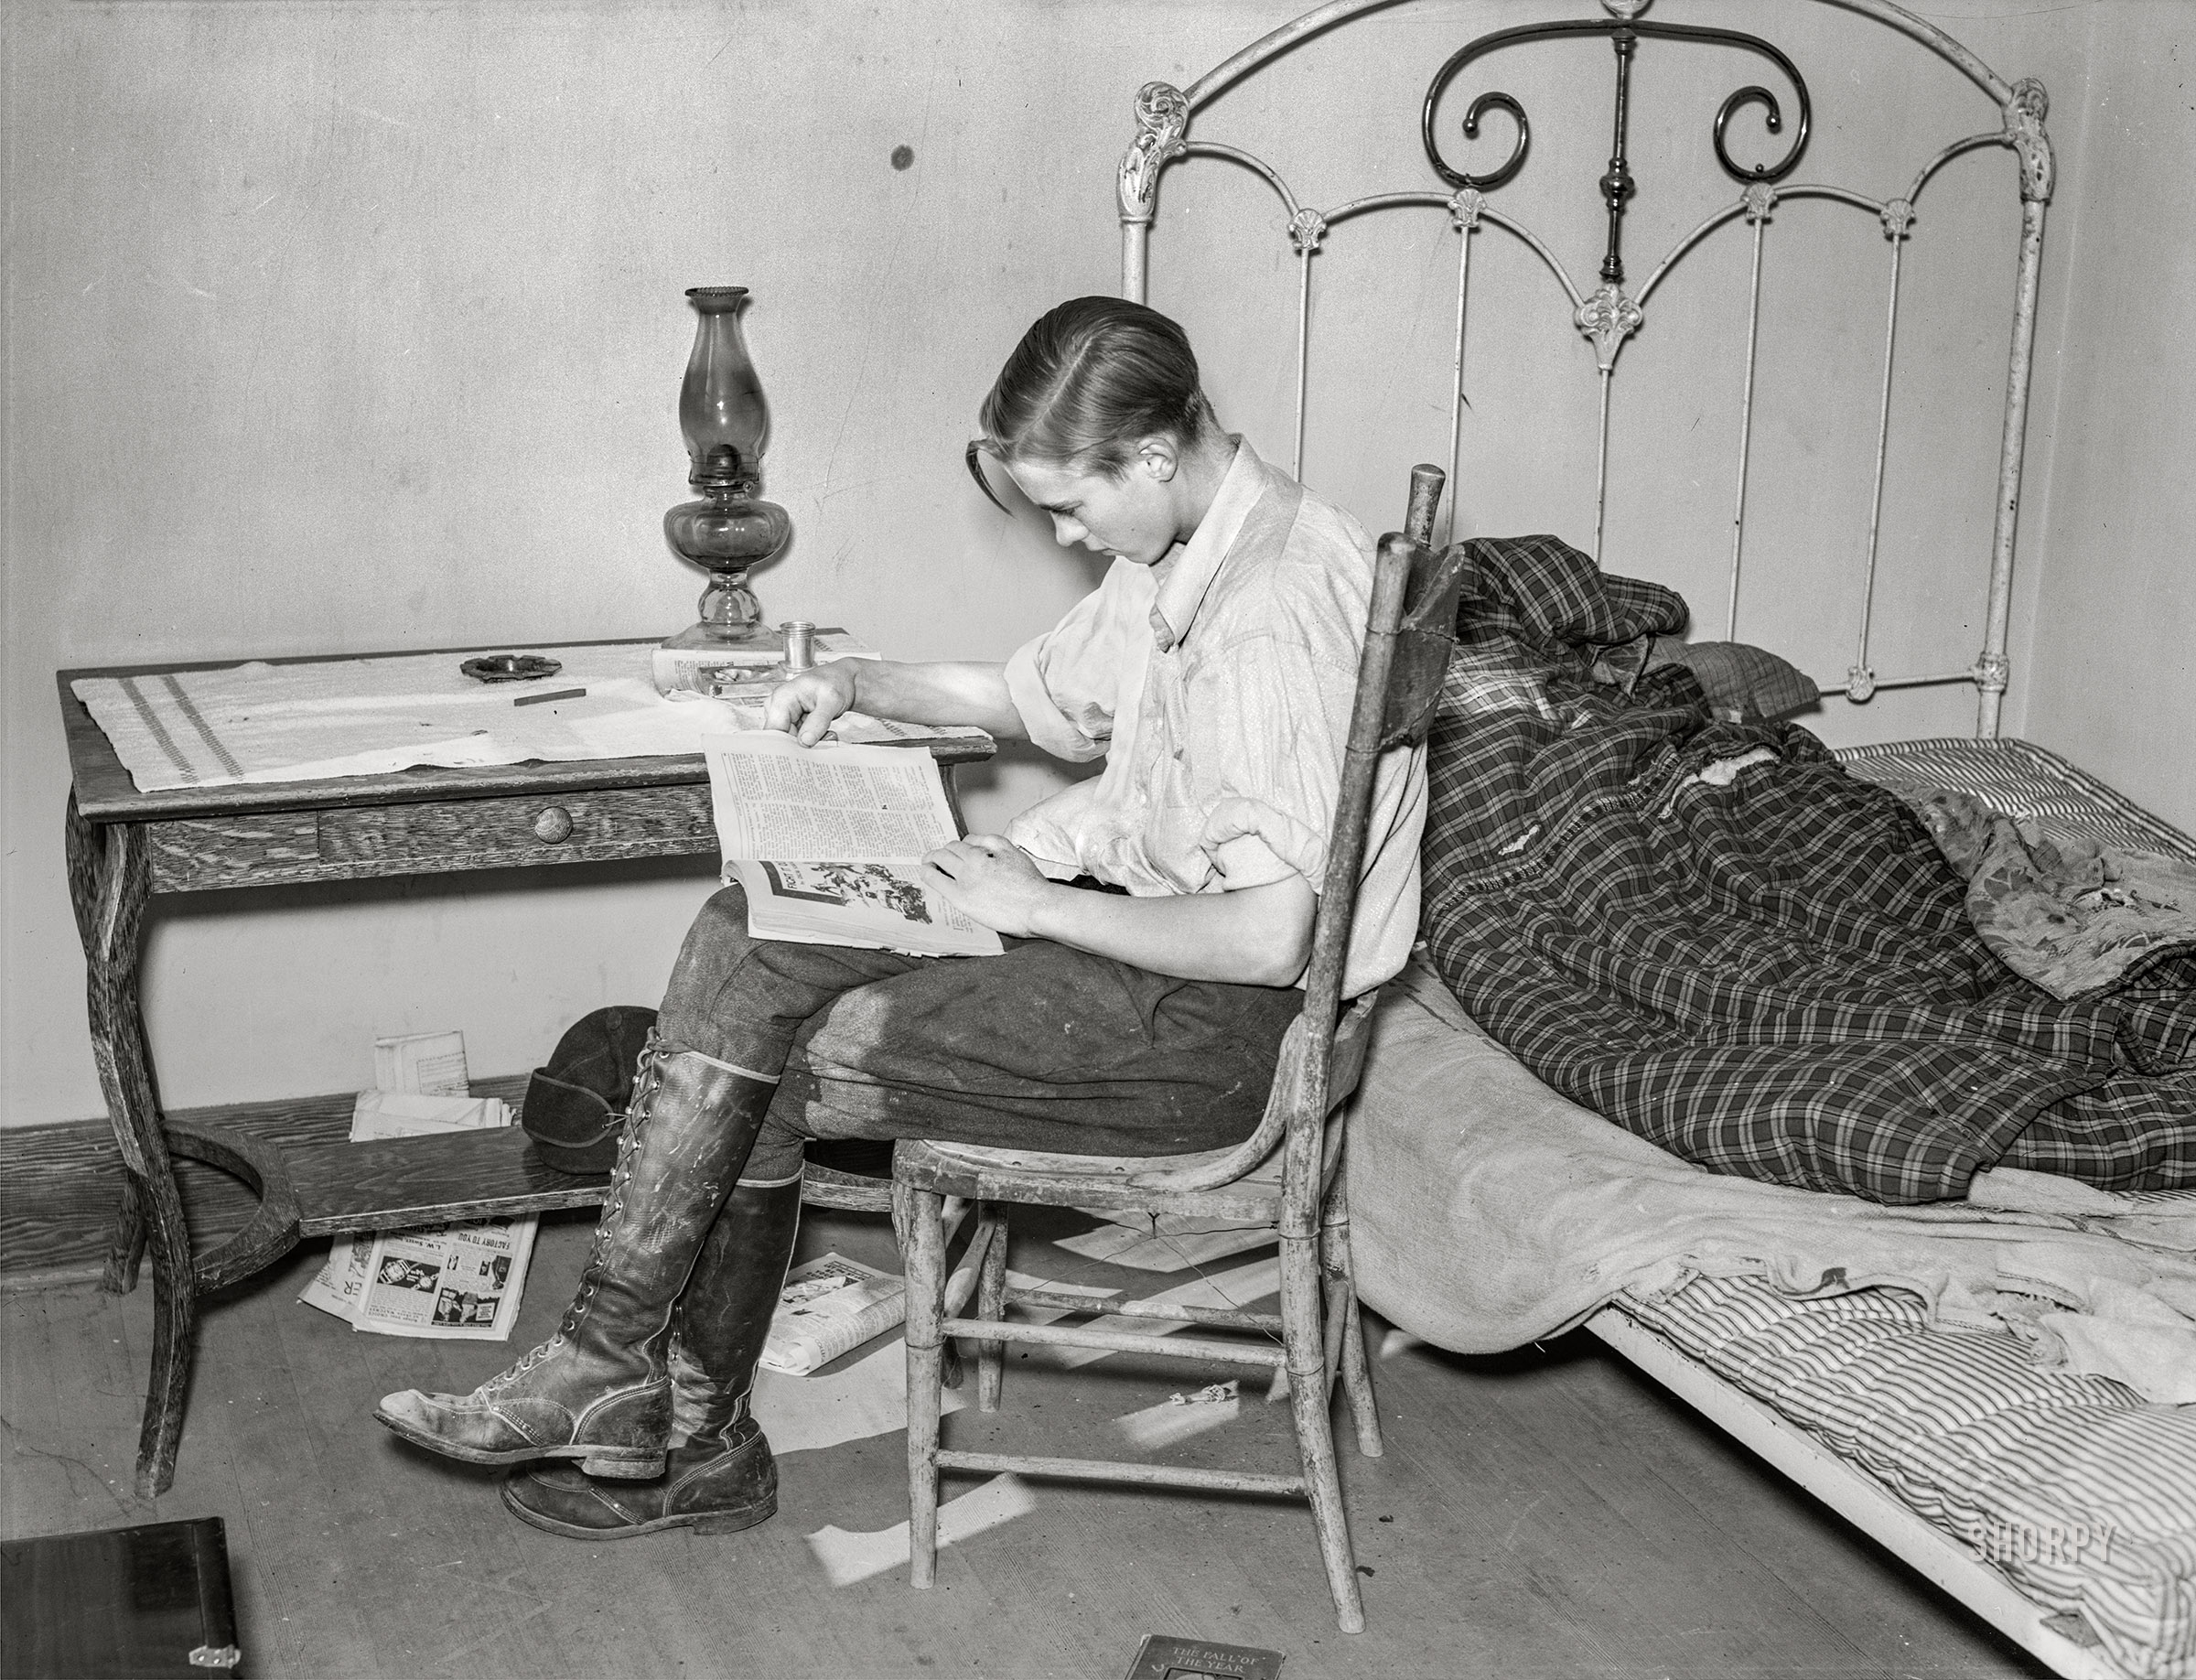 &nbsp; &nbsp; &nbsp; &nbsp; "Sure sounds like trouble," Tip muttered, frowning.
October 1937. "Boy reading in bedroom. Note lack of proper bed clothing. Home of A.O. Ryland, farmer who has quit farming. Near Williston, North Dakota." Medium format acetate negative by Russell Lee for the Farm Security Administration. View full size.